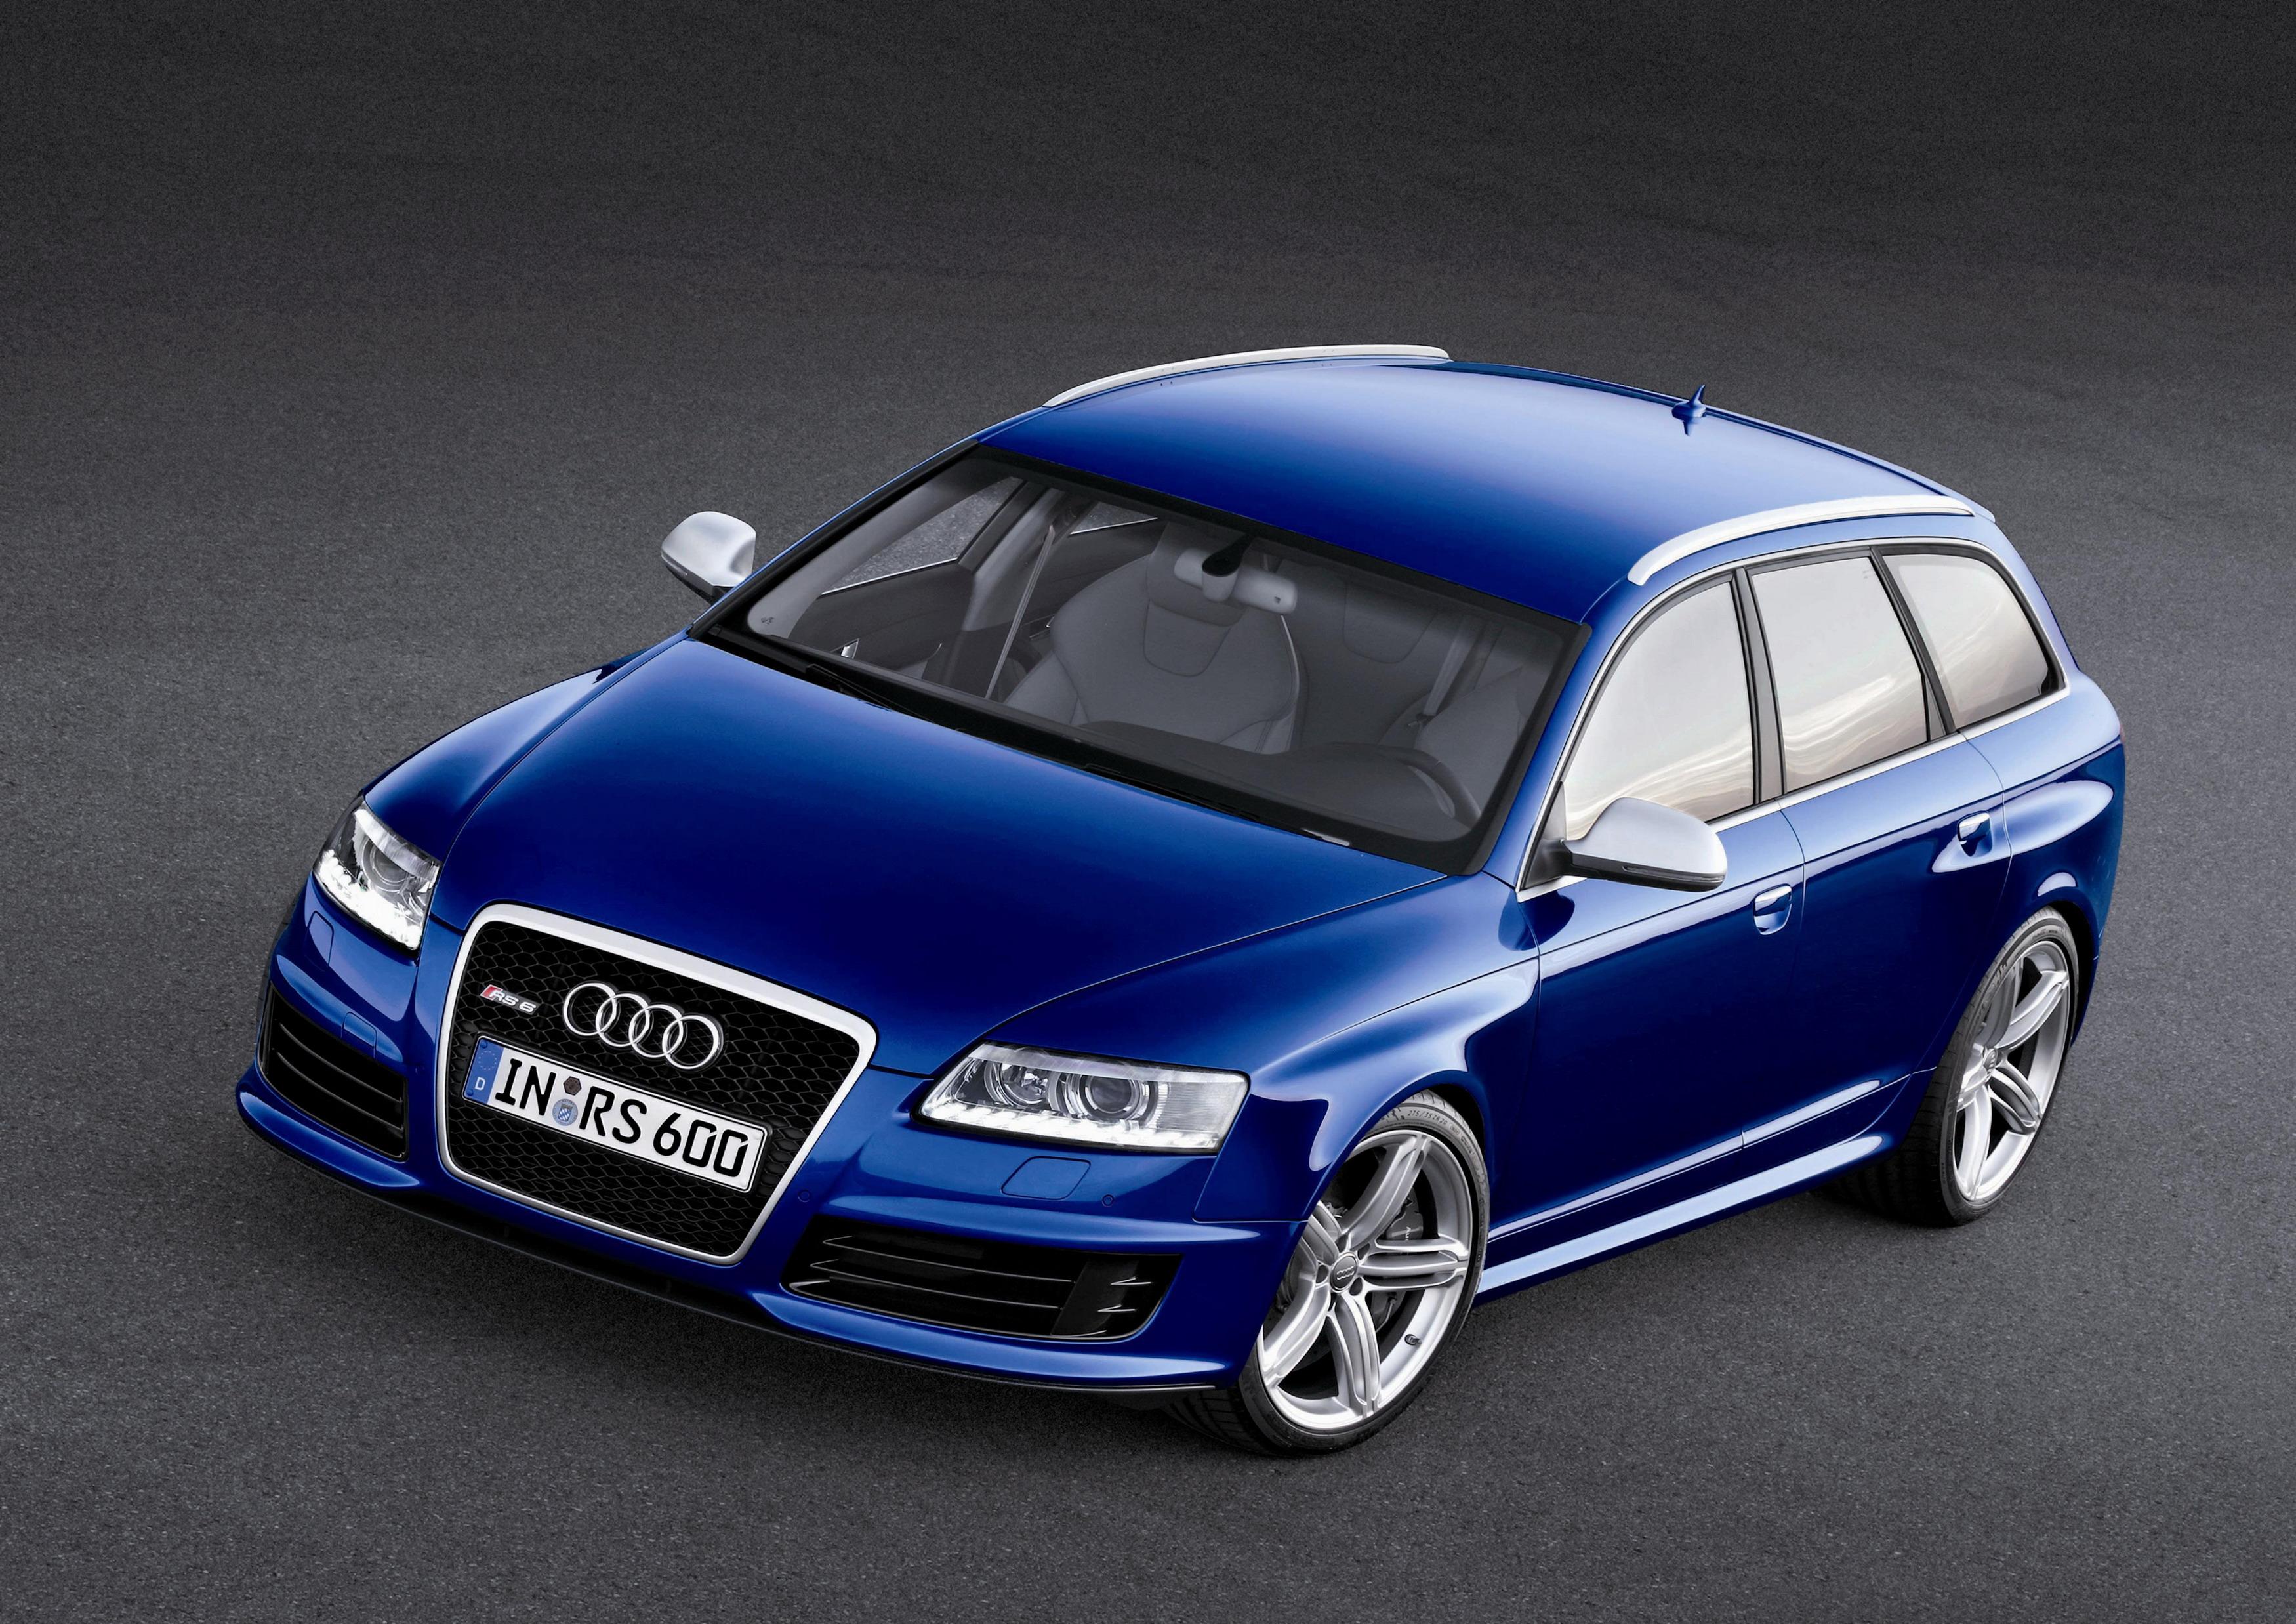 Audi RS 6 Avant accessories specifications